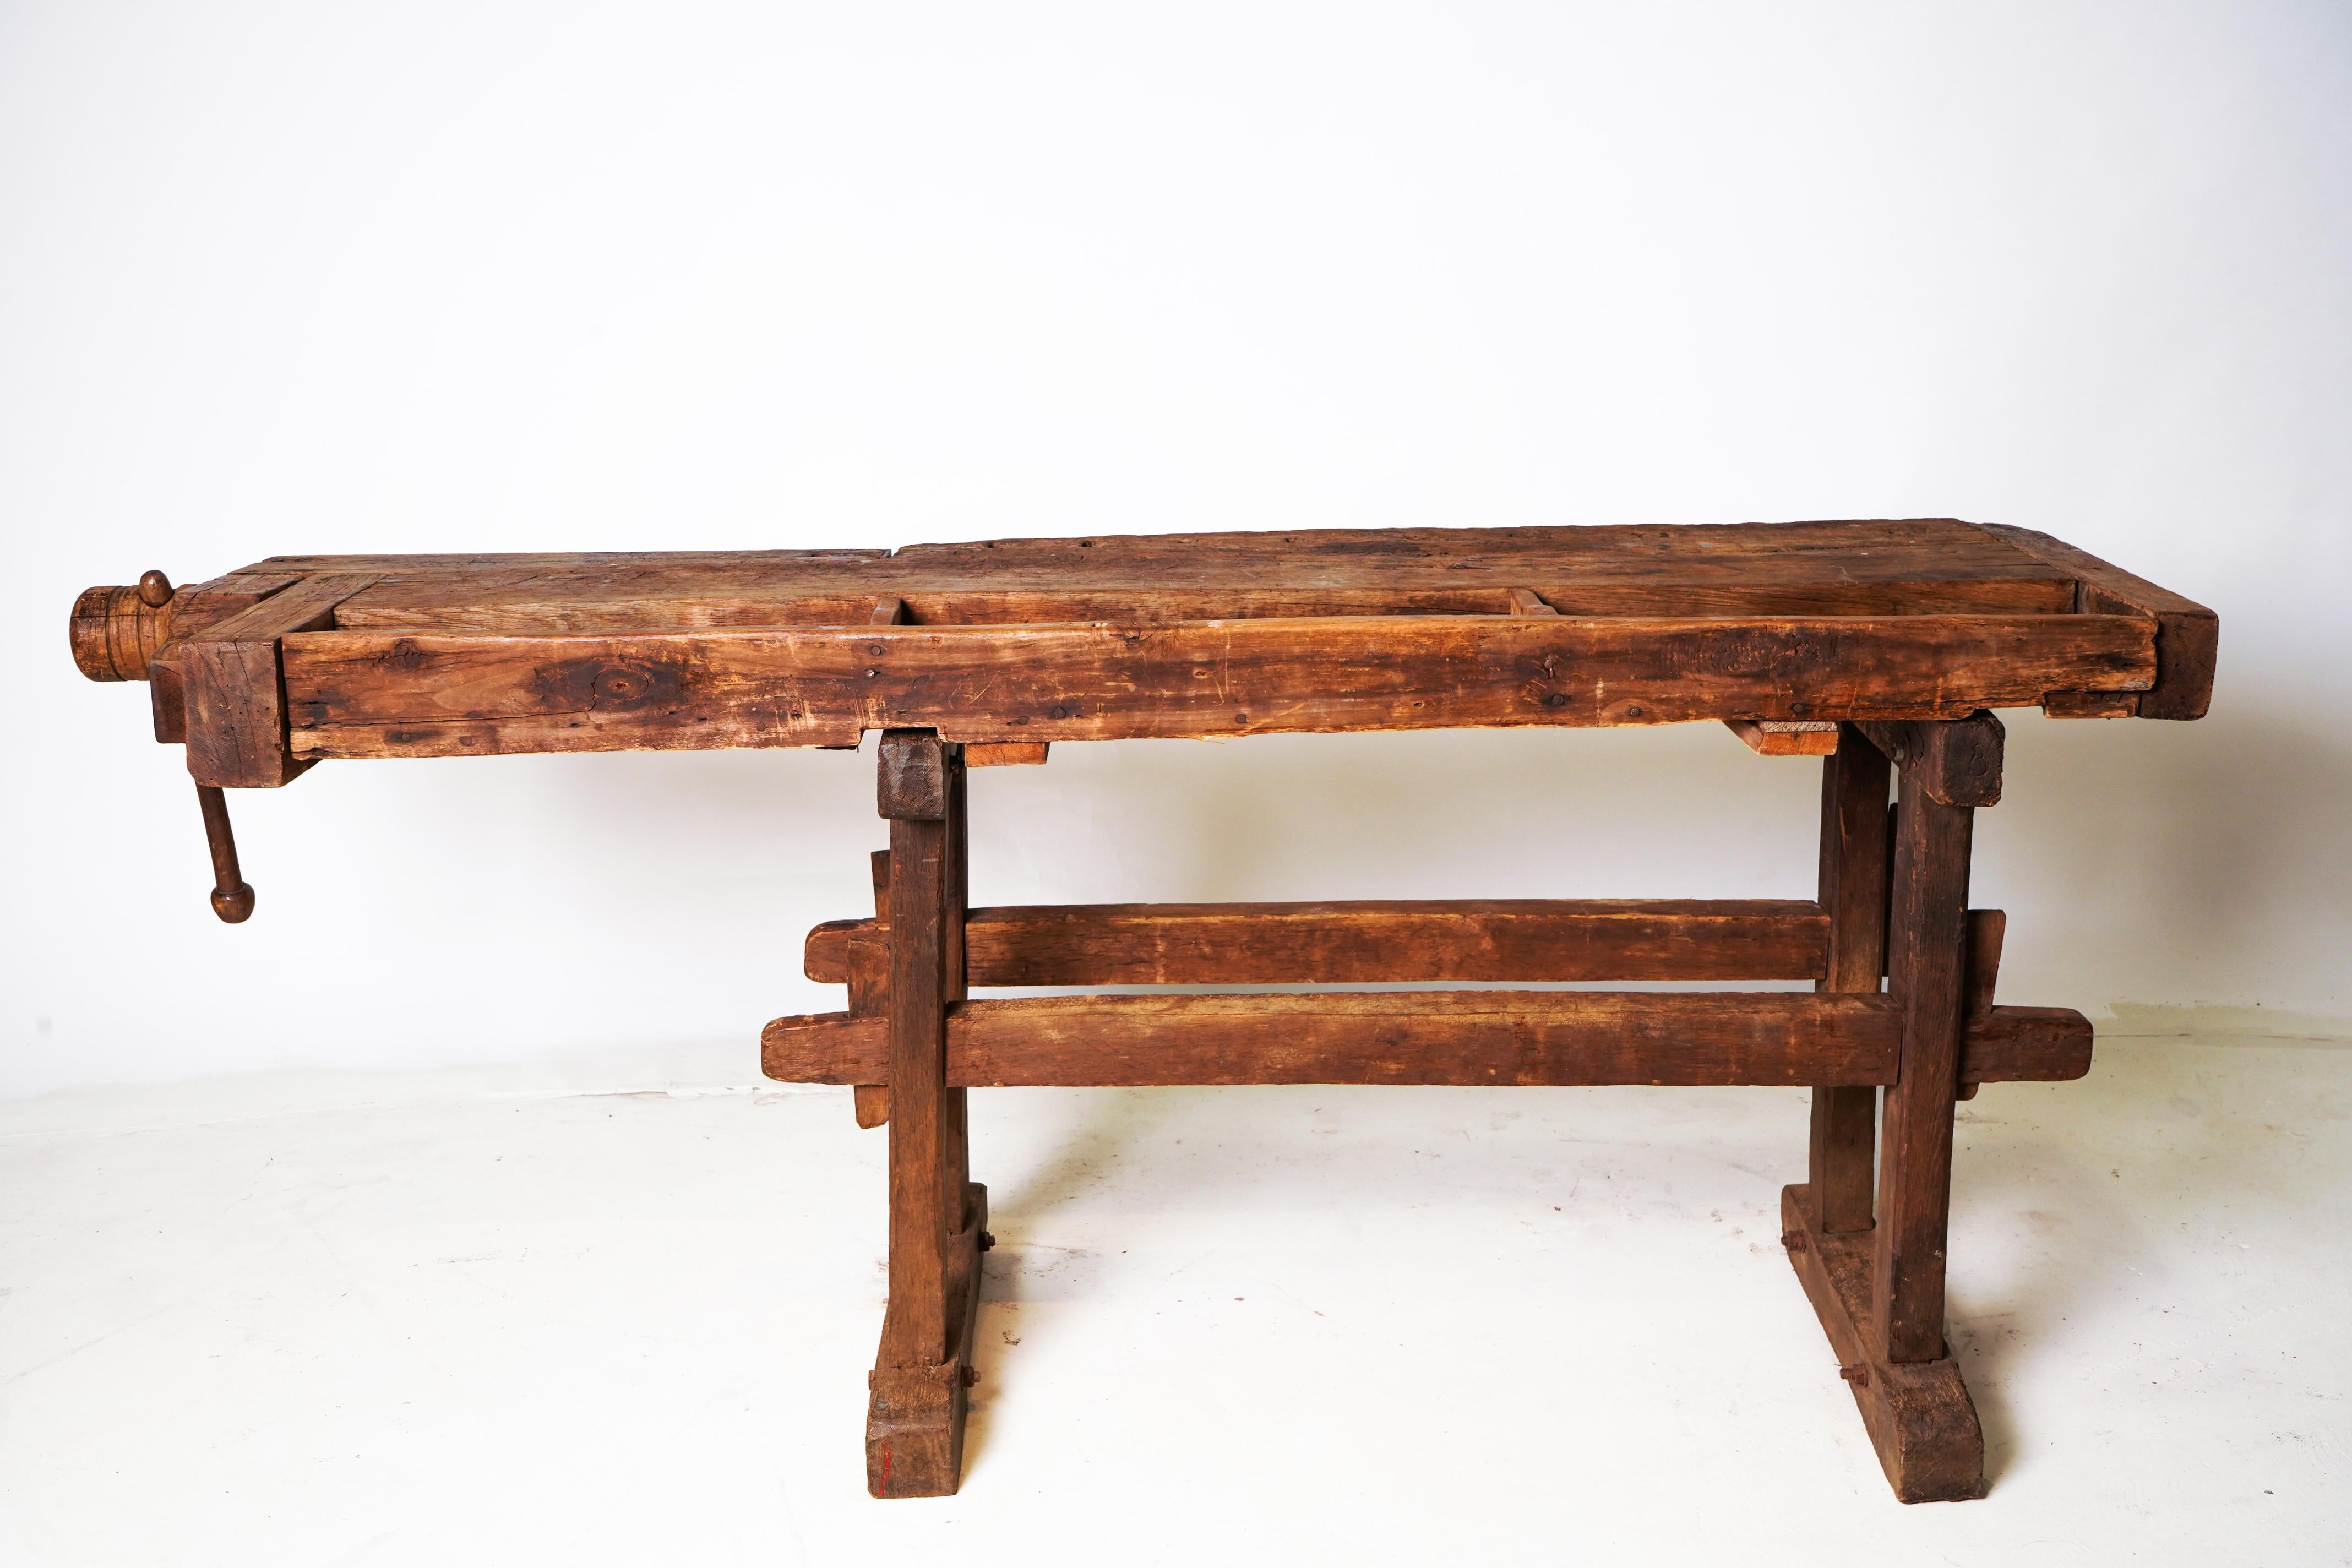 This unusually well-preserved antique workbench is made from Oak Wood and features a fully functioning vise with original working wooden screw. Remarkably for a piece that has been in such long use, all parts appear to be original. The top is